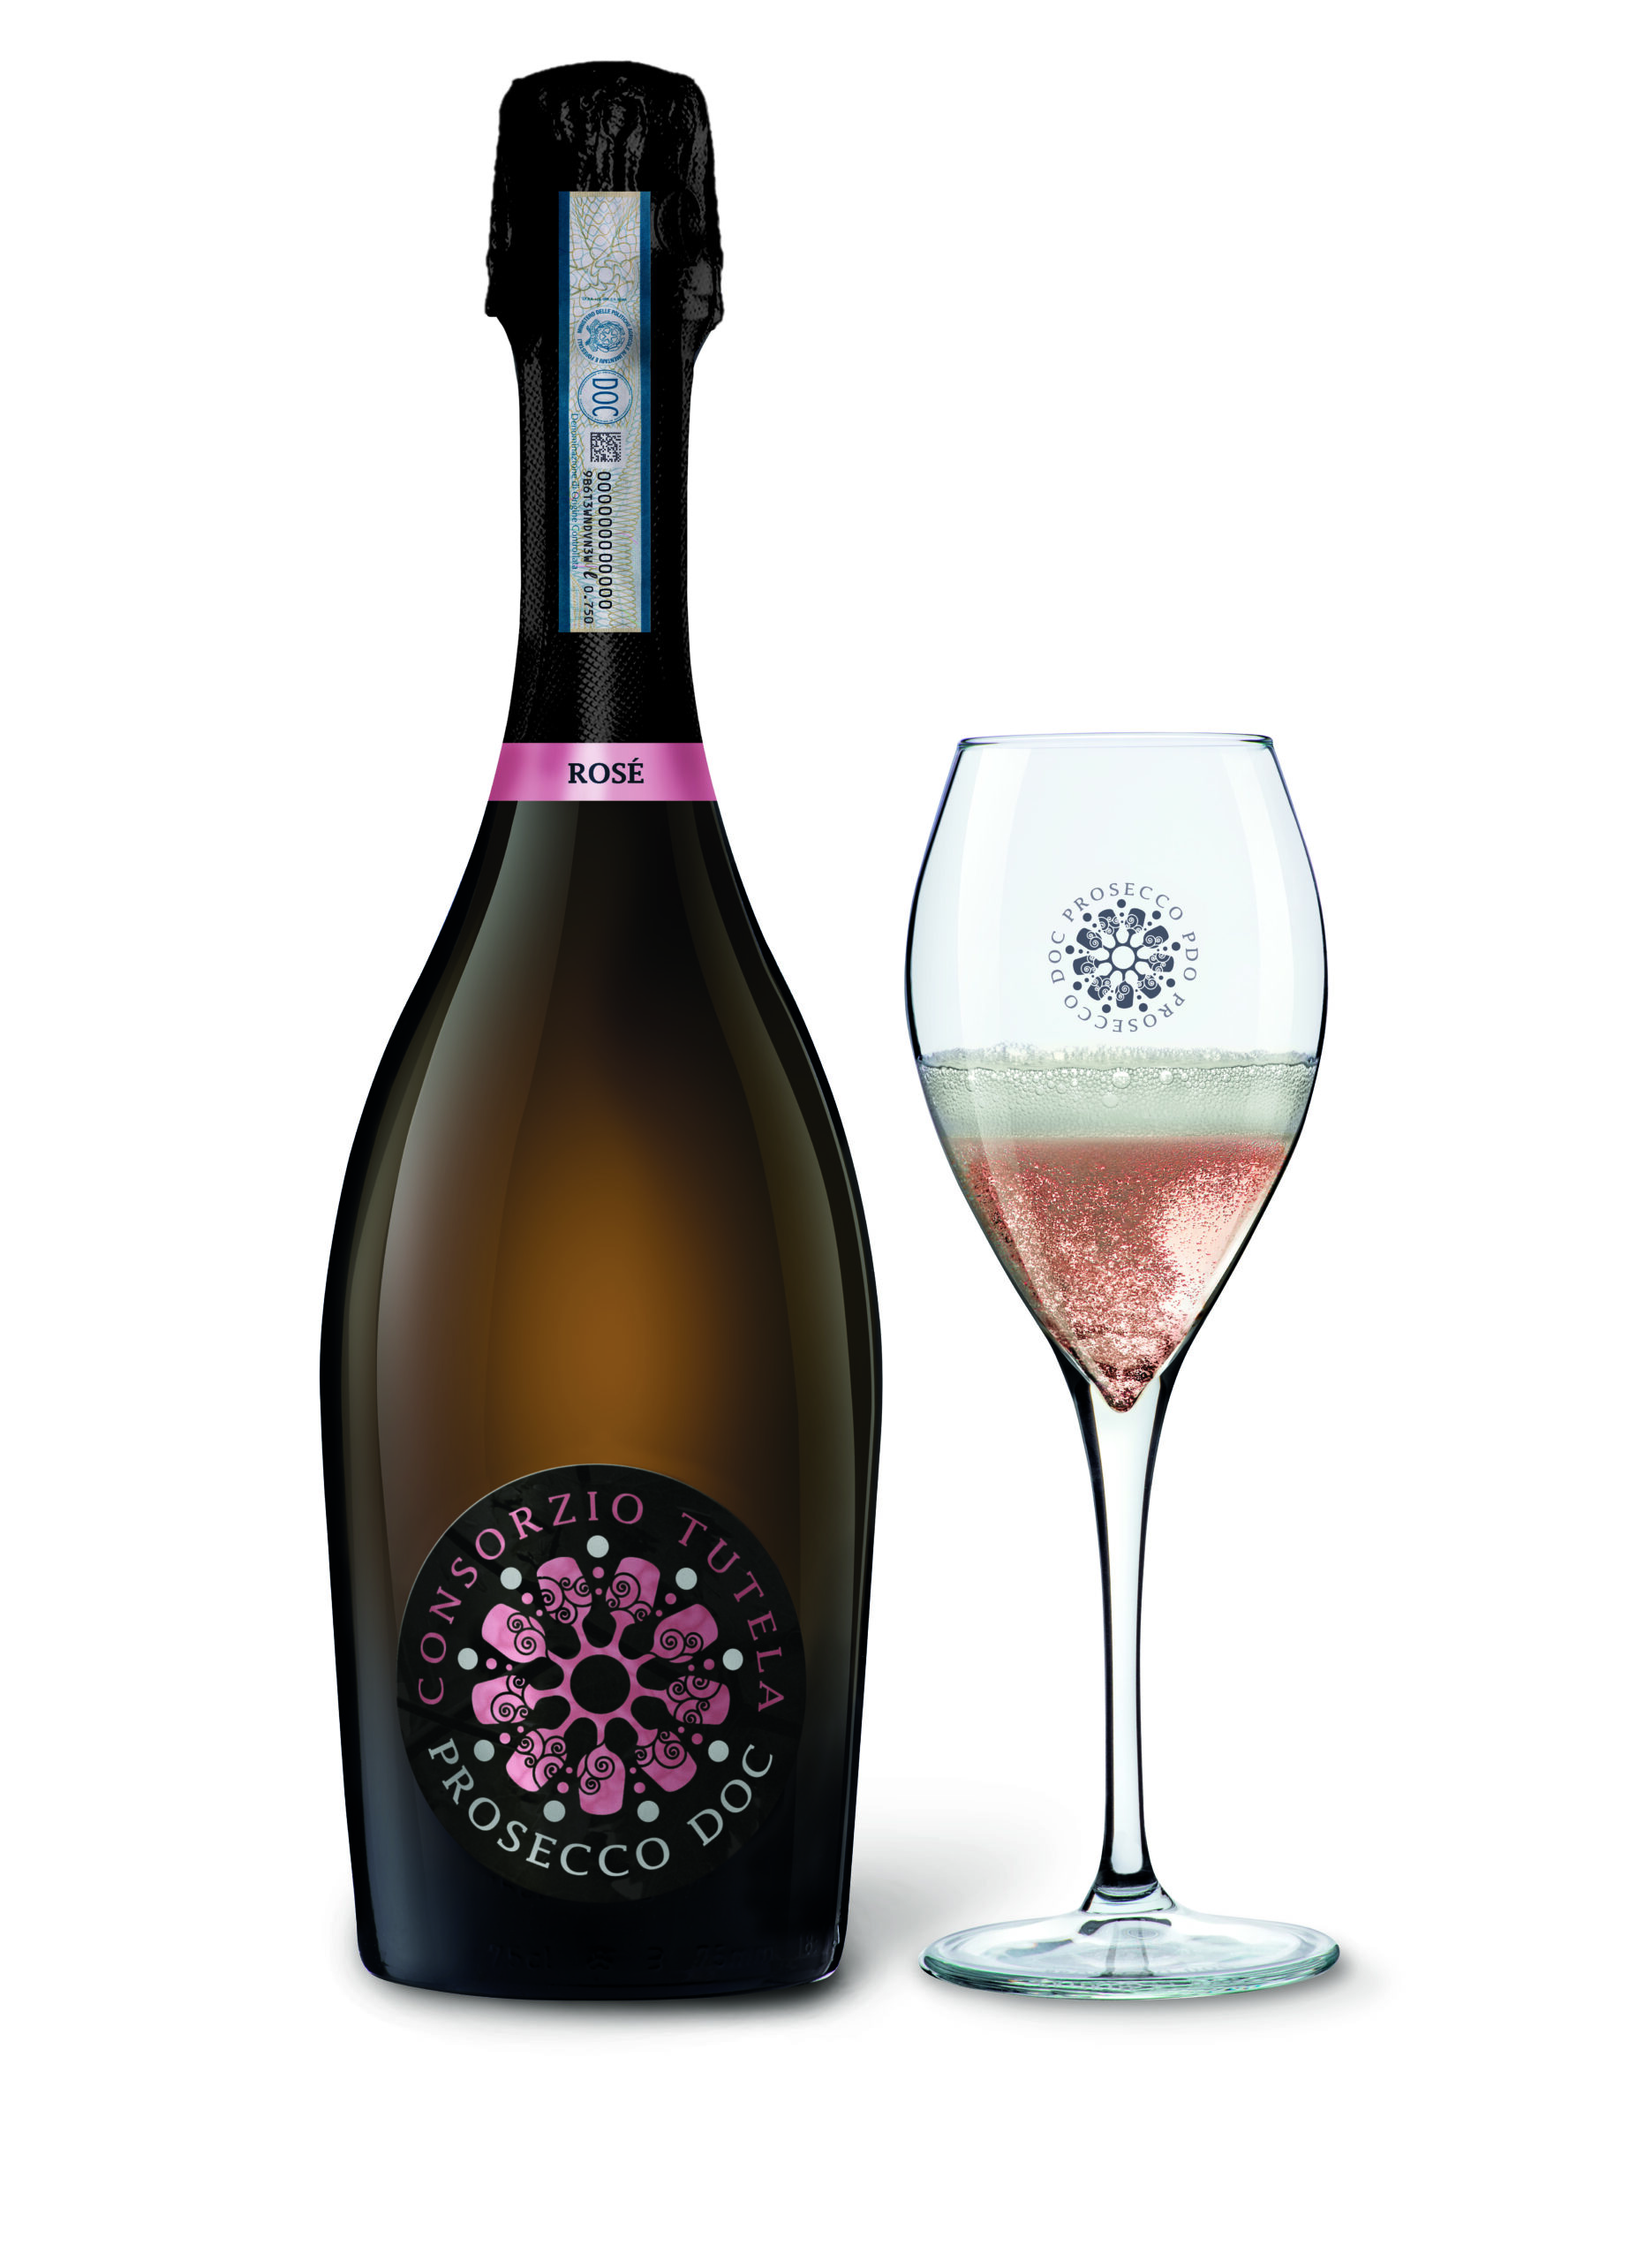 Pink Prosecco will 'breathe life' into the sparkling wine category